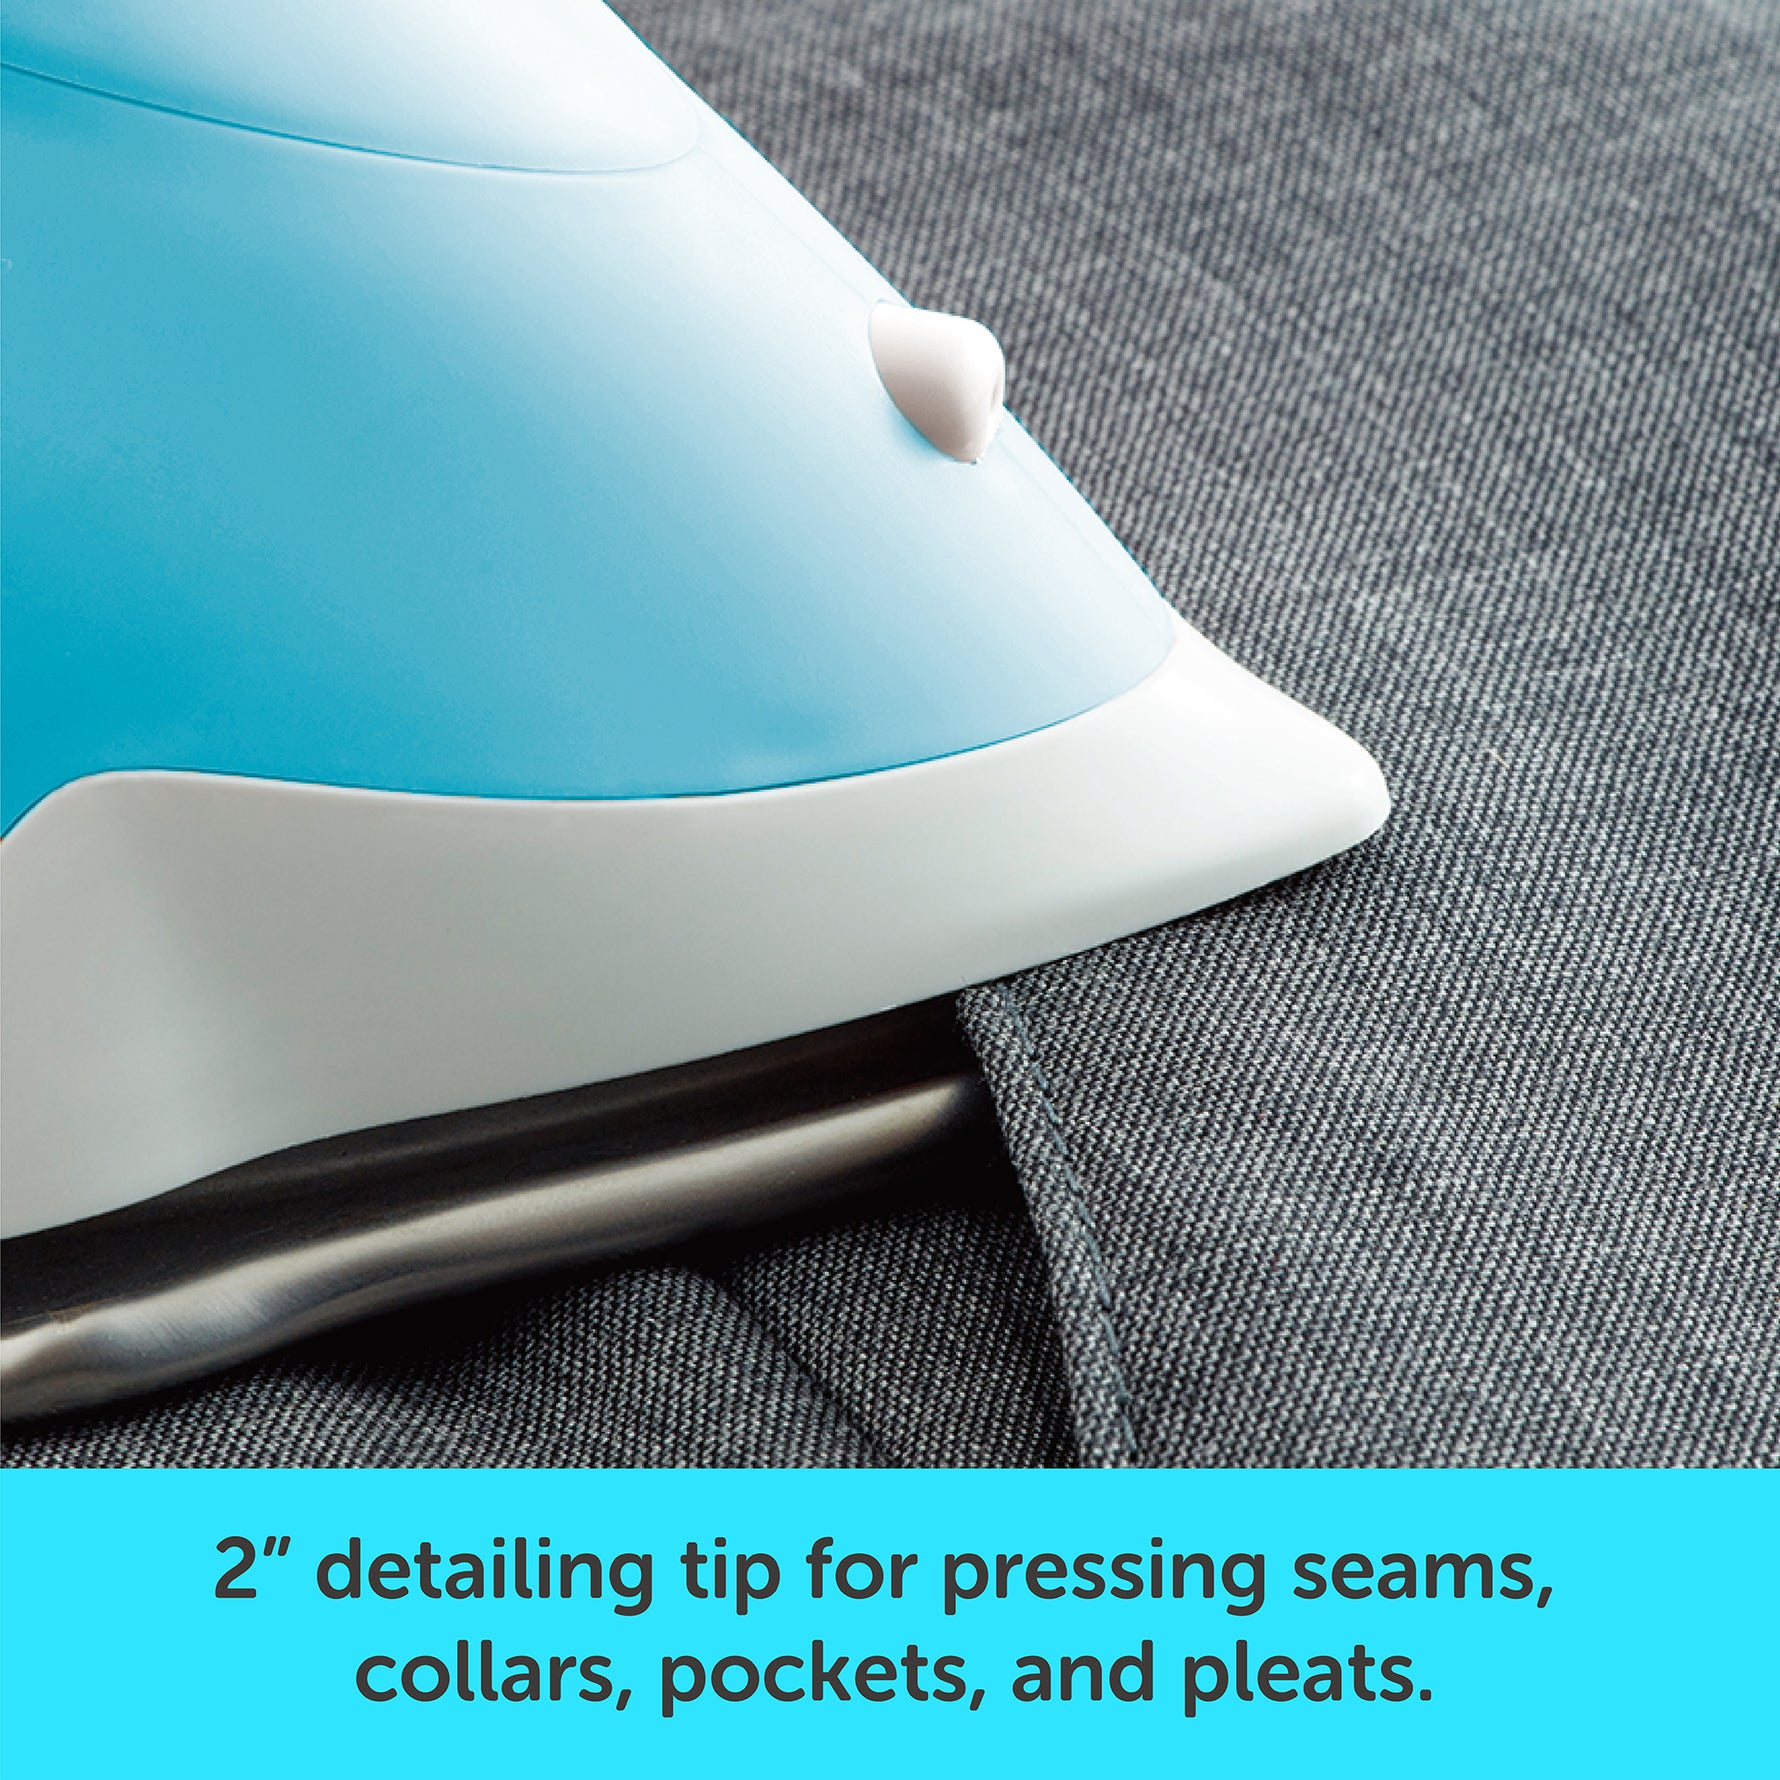 Auto-Lift Iron For Quilters - Get The Safest Iron From Oliso – oliso